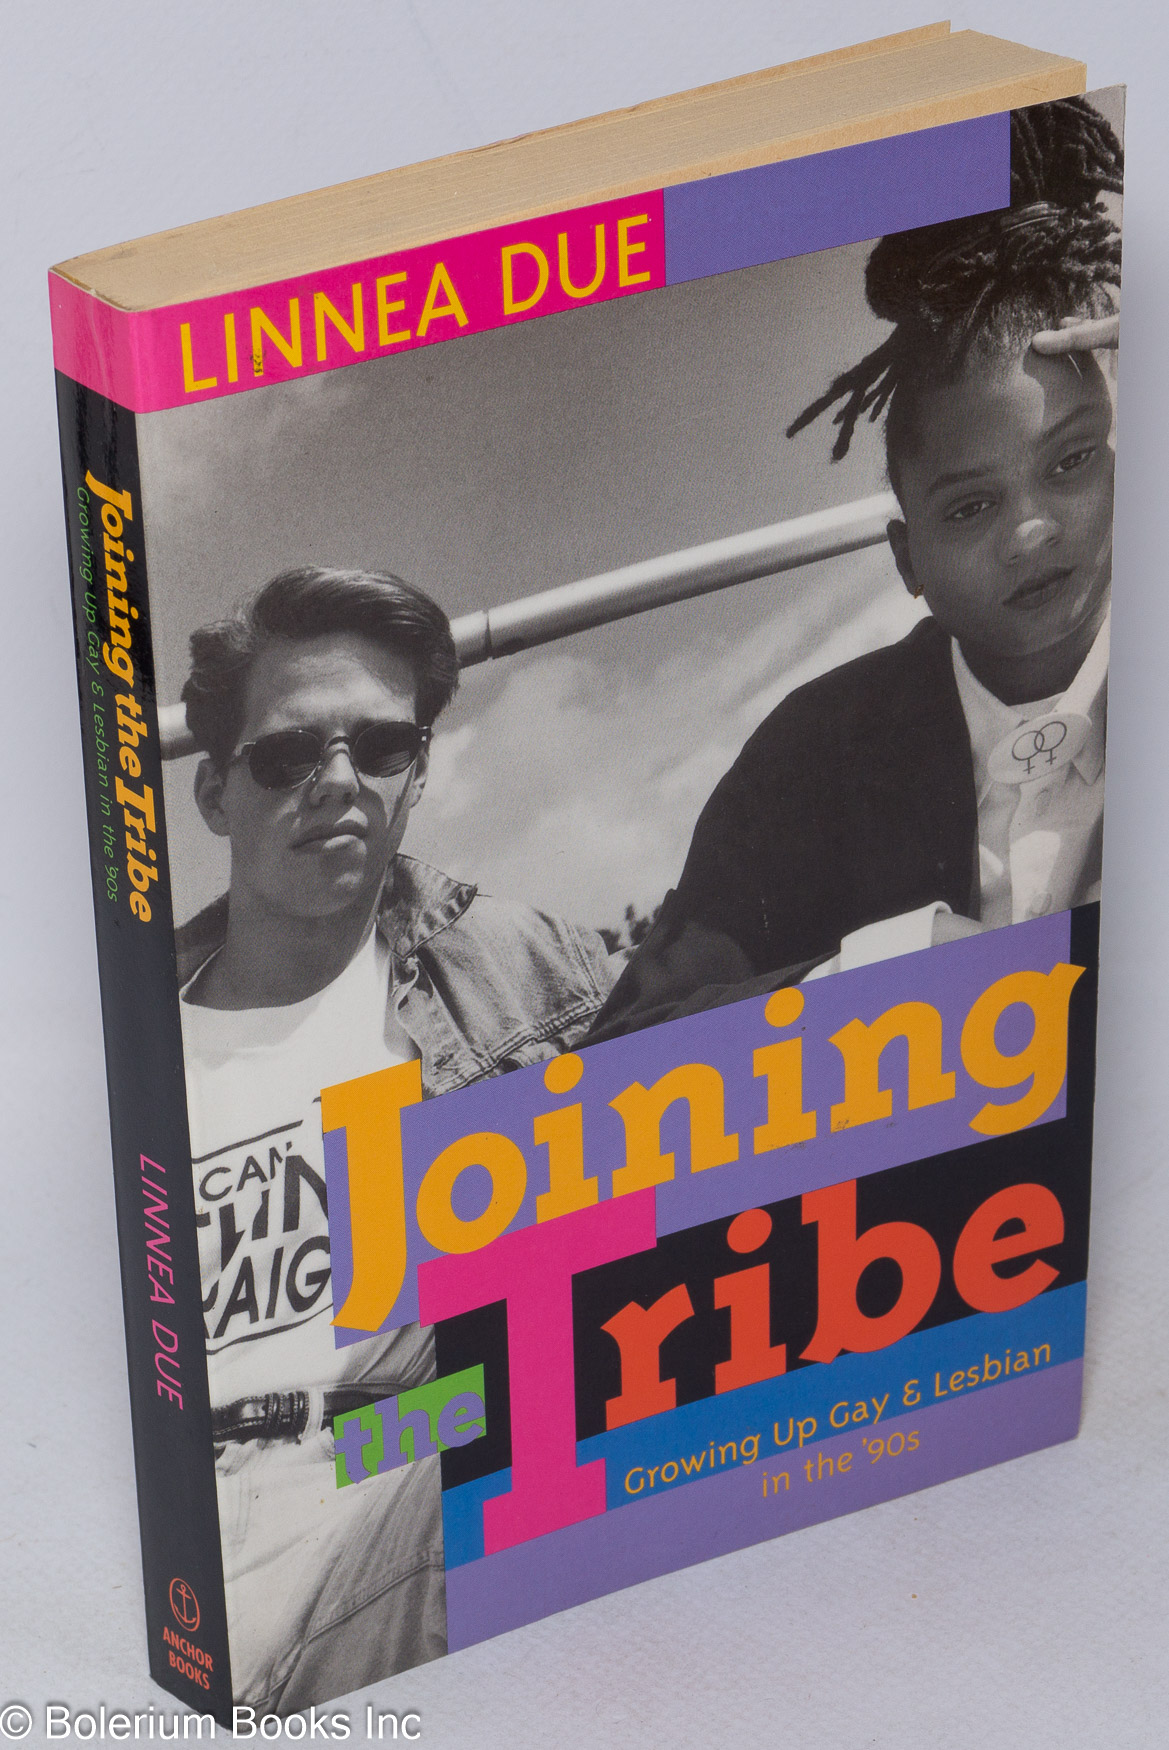 Joining The Tribe Growing Up Gay And Lesbian In The 90s By Due Linnea A Paperback 1985